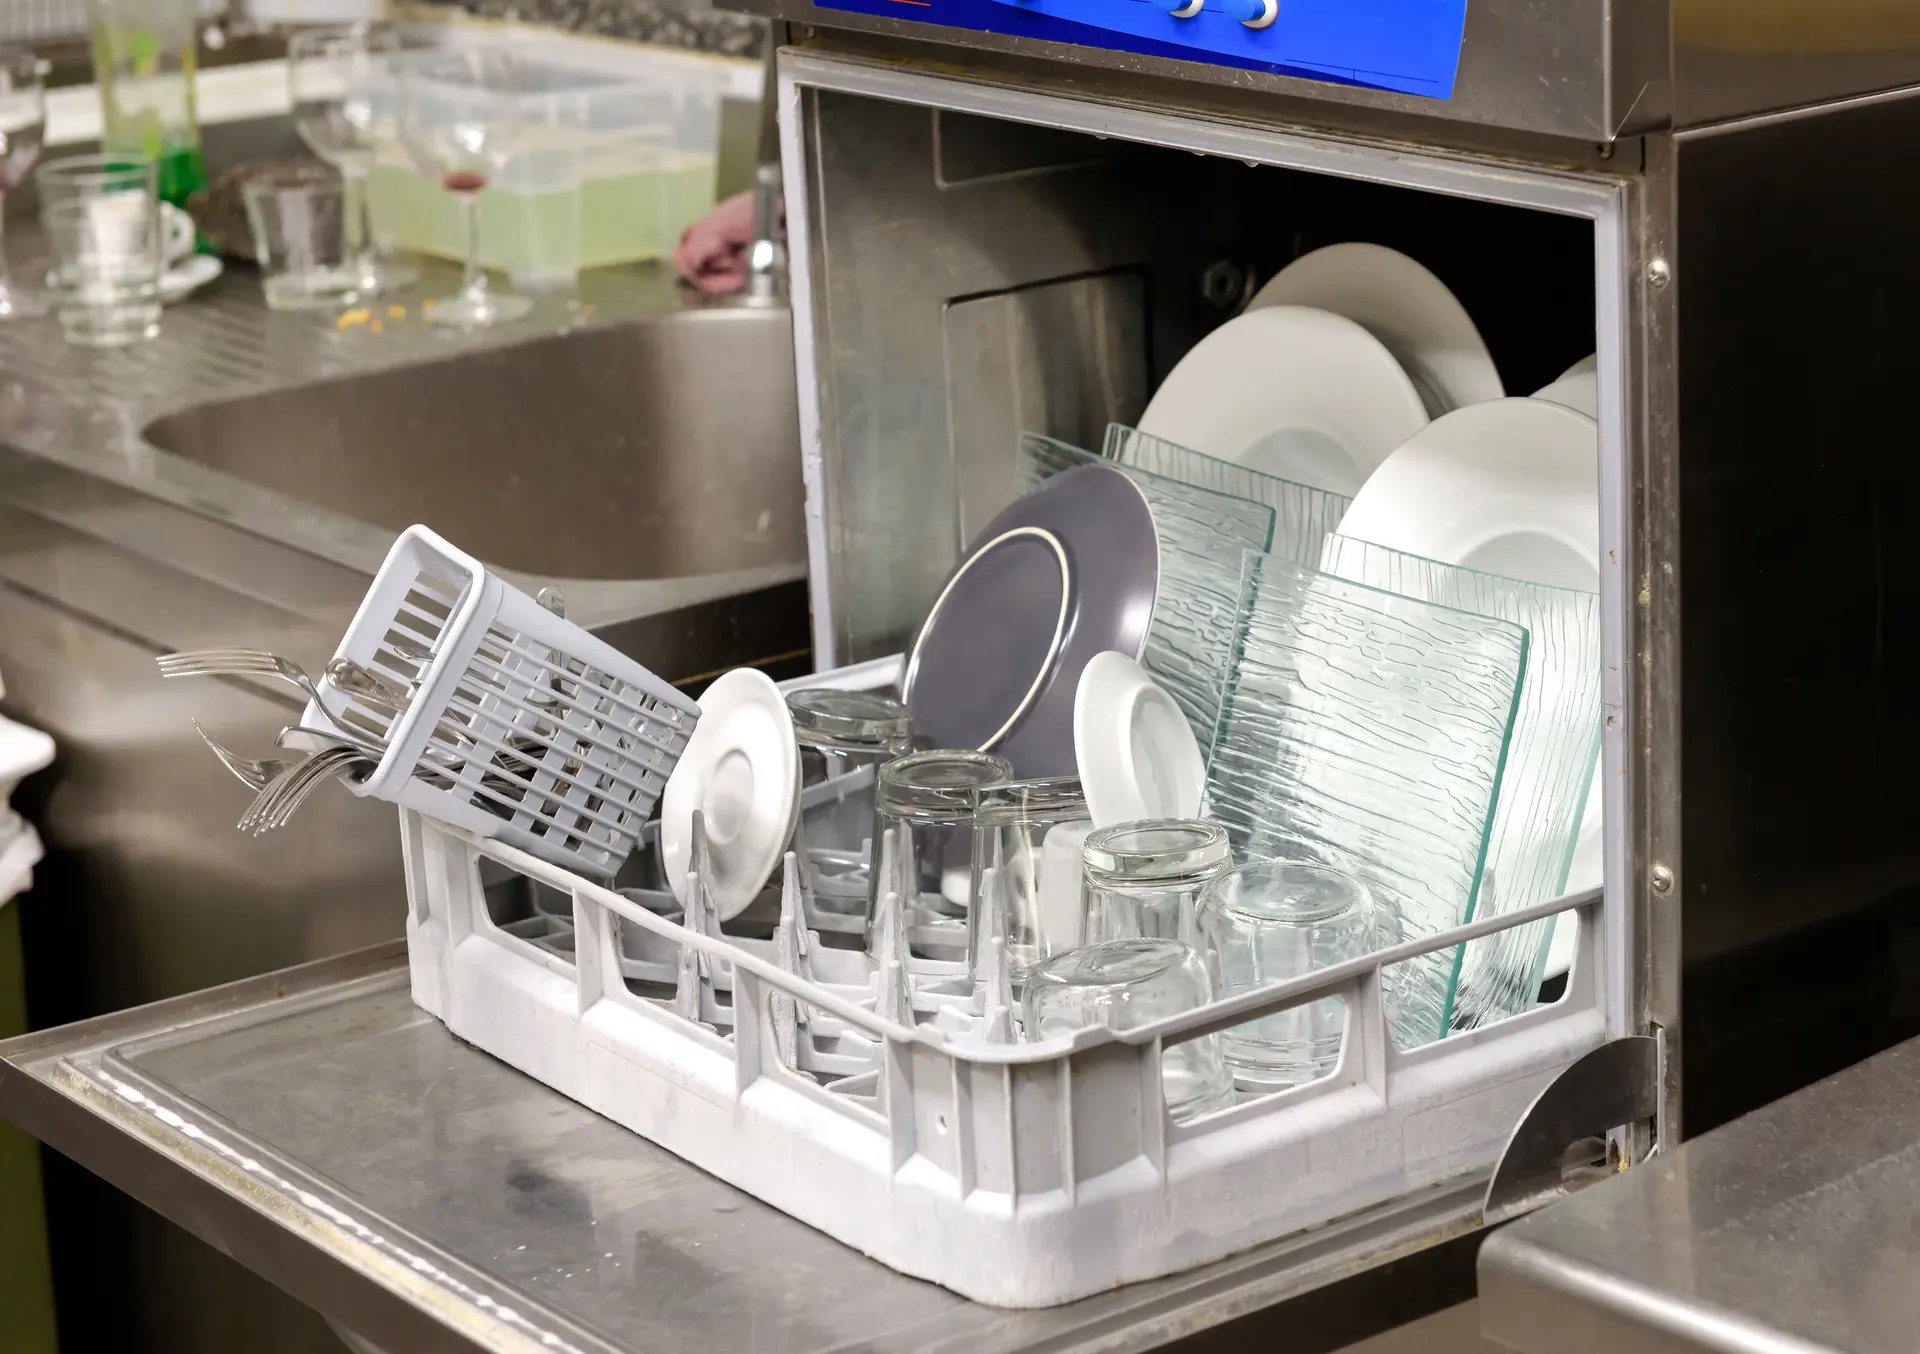 Commercial Dishwasher Q&A: Choosing The Best for Your Needs